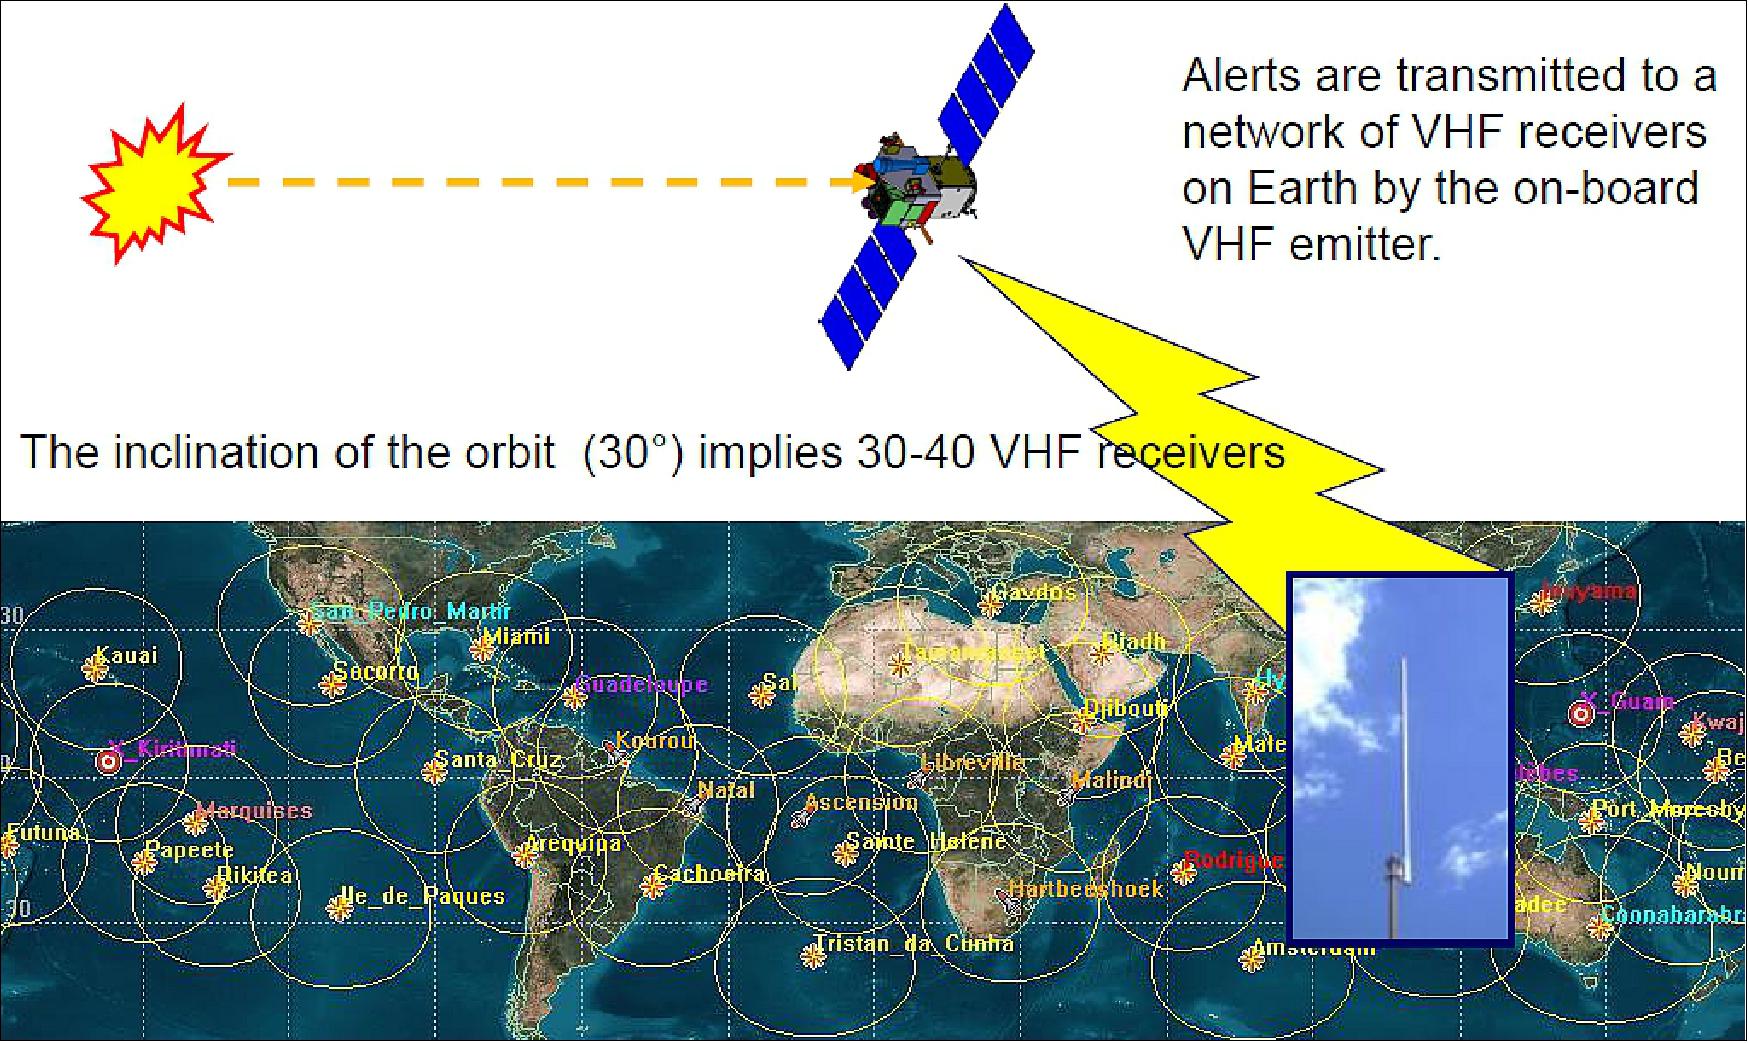 Figure 14: Prompt dissemination of GRB parameters. Goal : 65% of the alerts received within 30 seconds (image credit: SVOM collaboration)